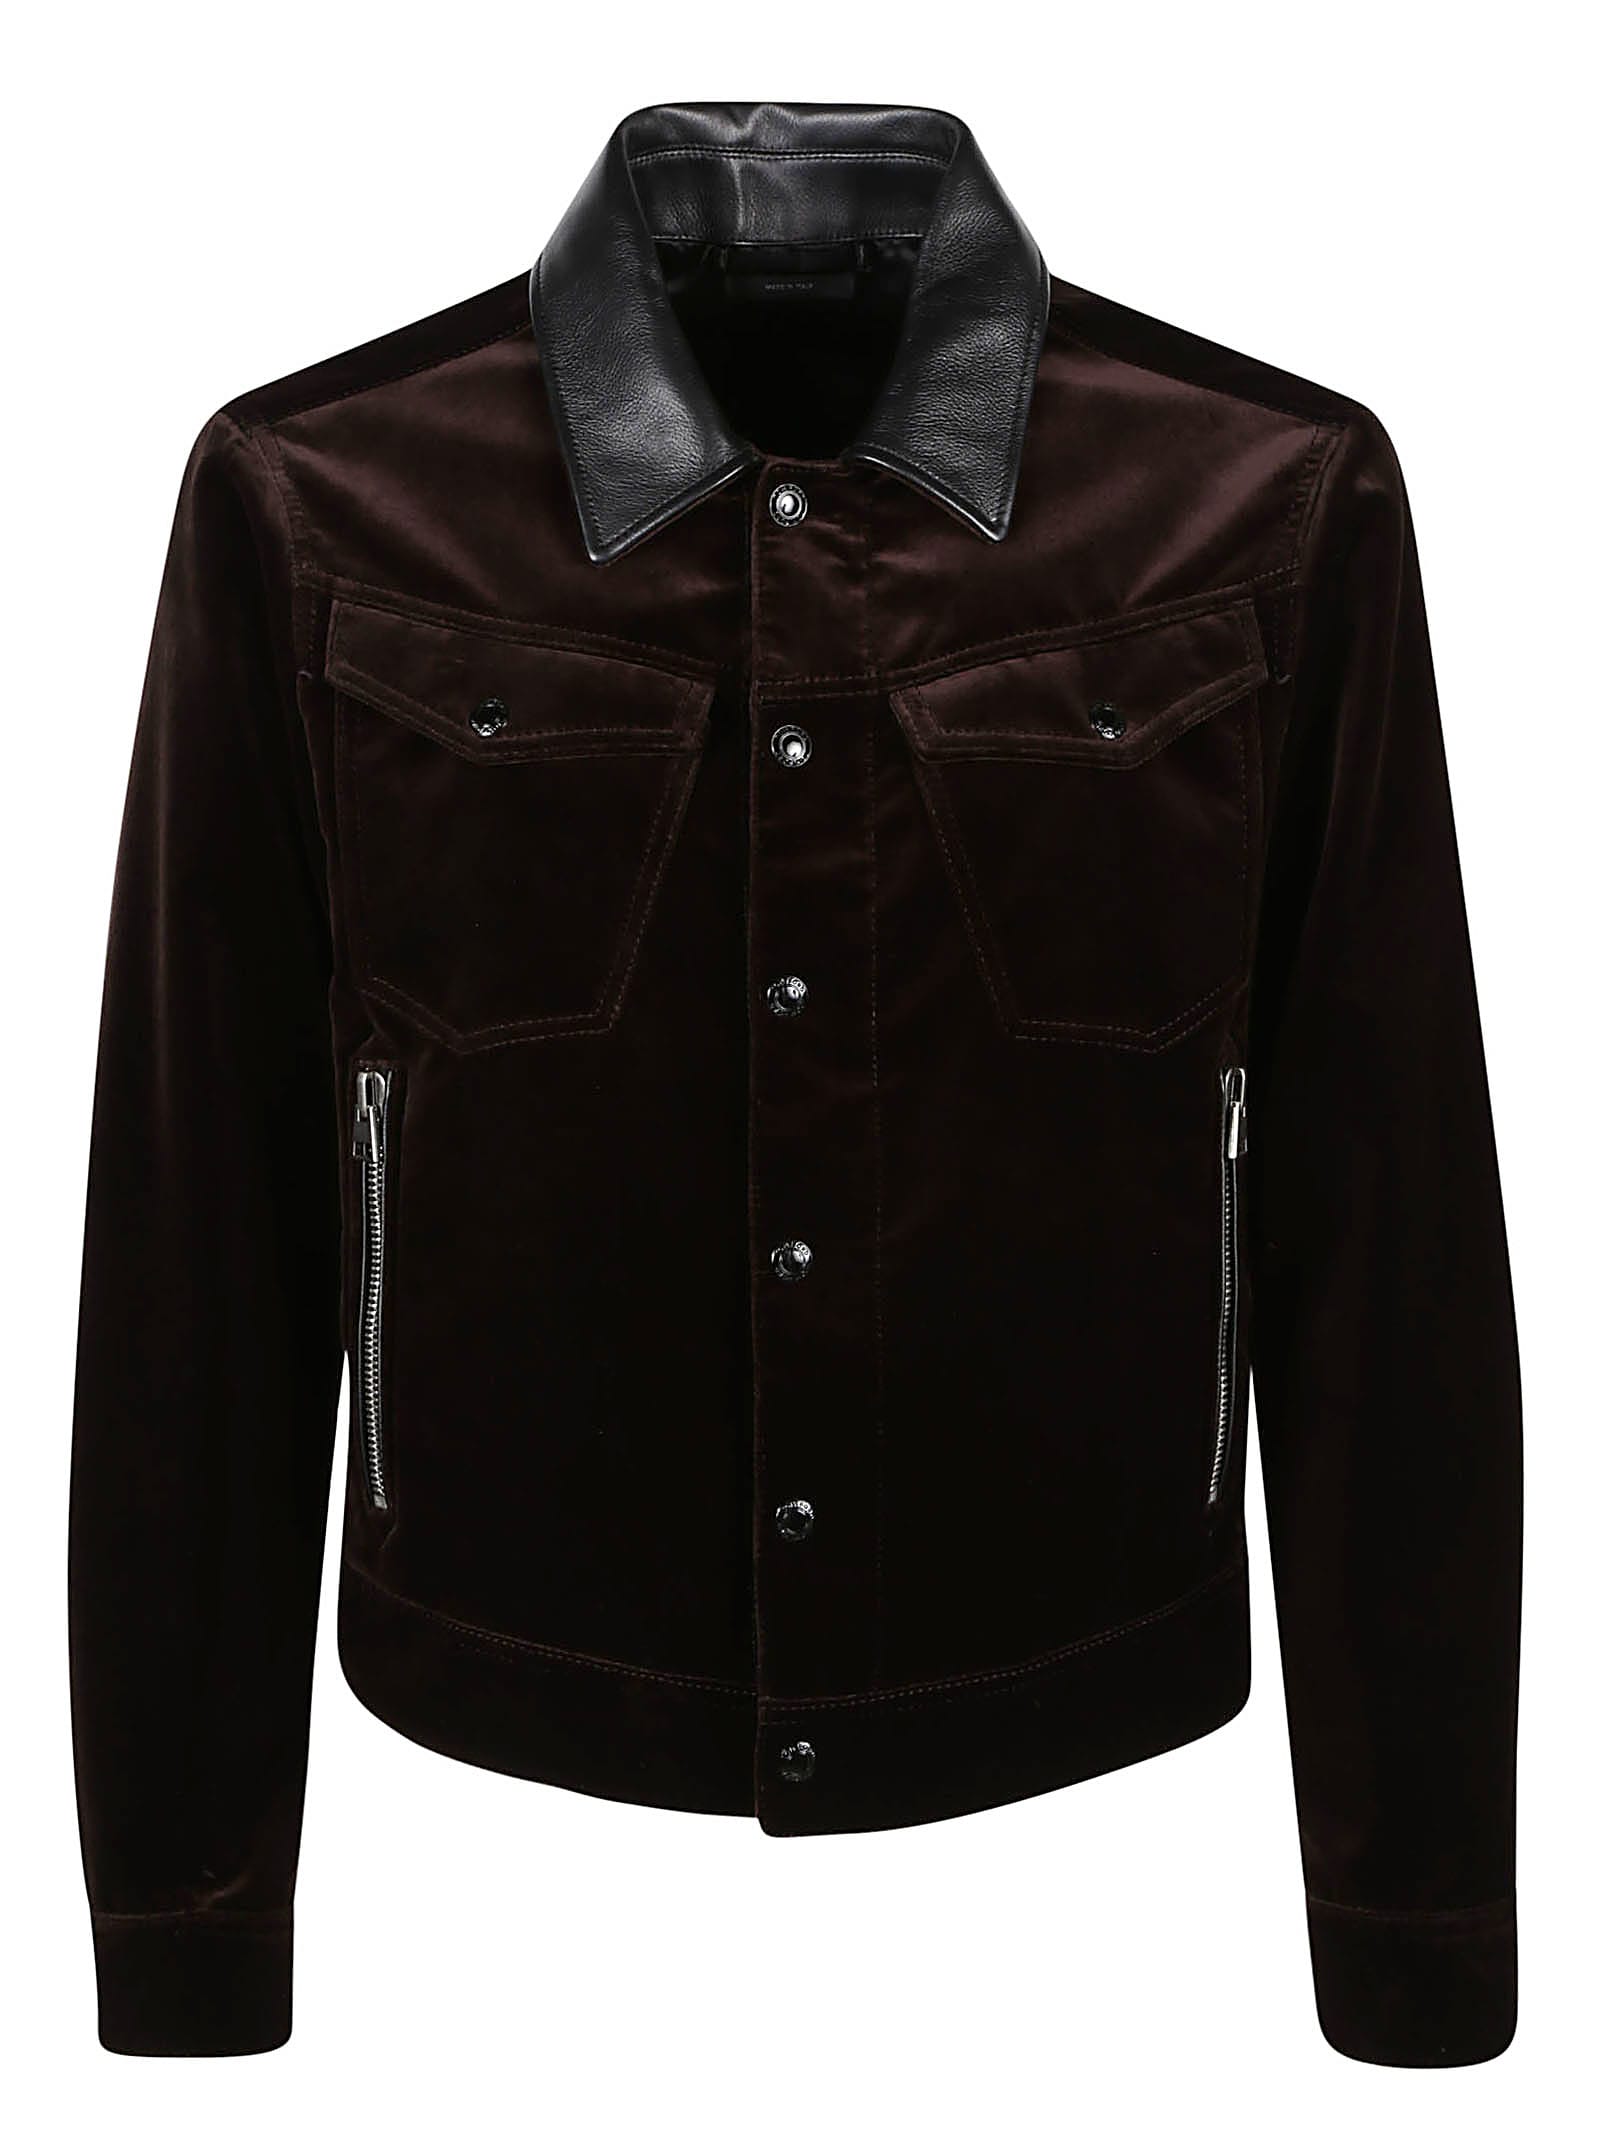 TOM FORD COMPACT LIGHT WESTERN JACKET